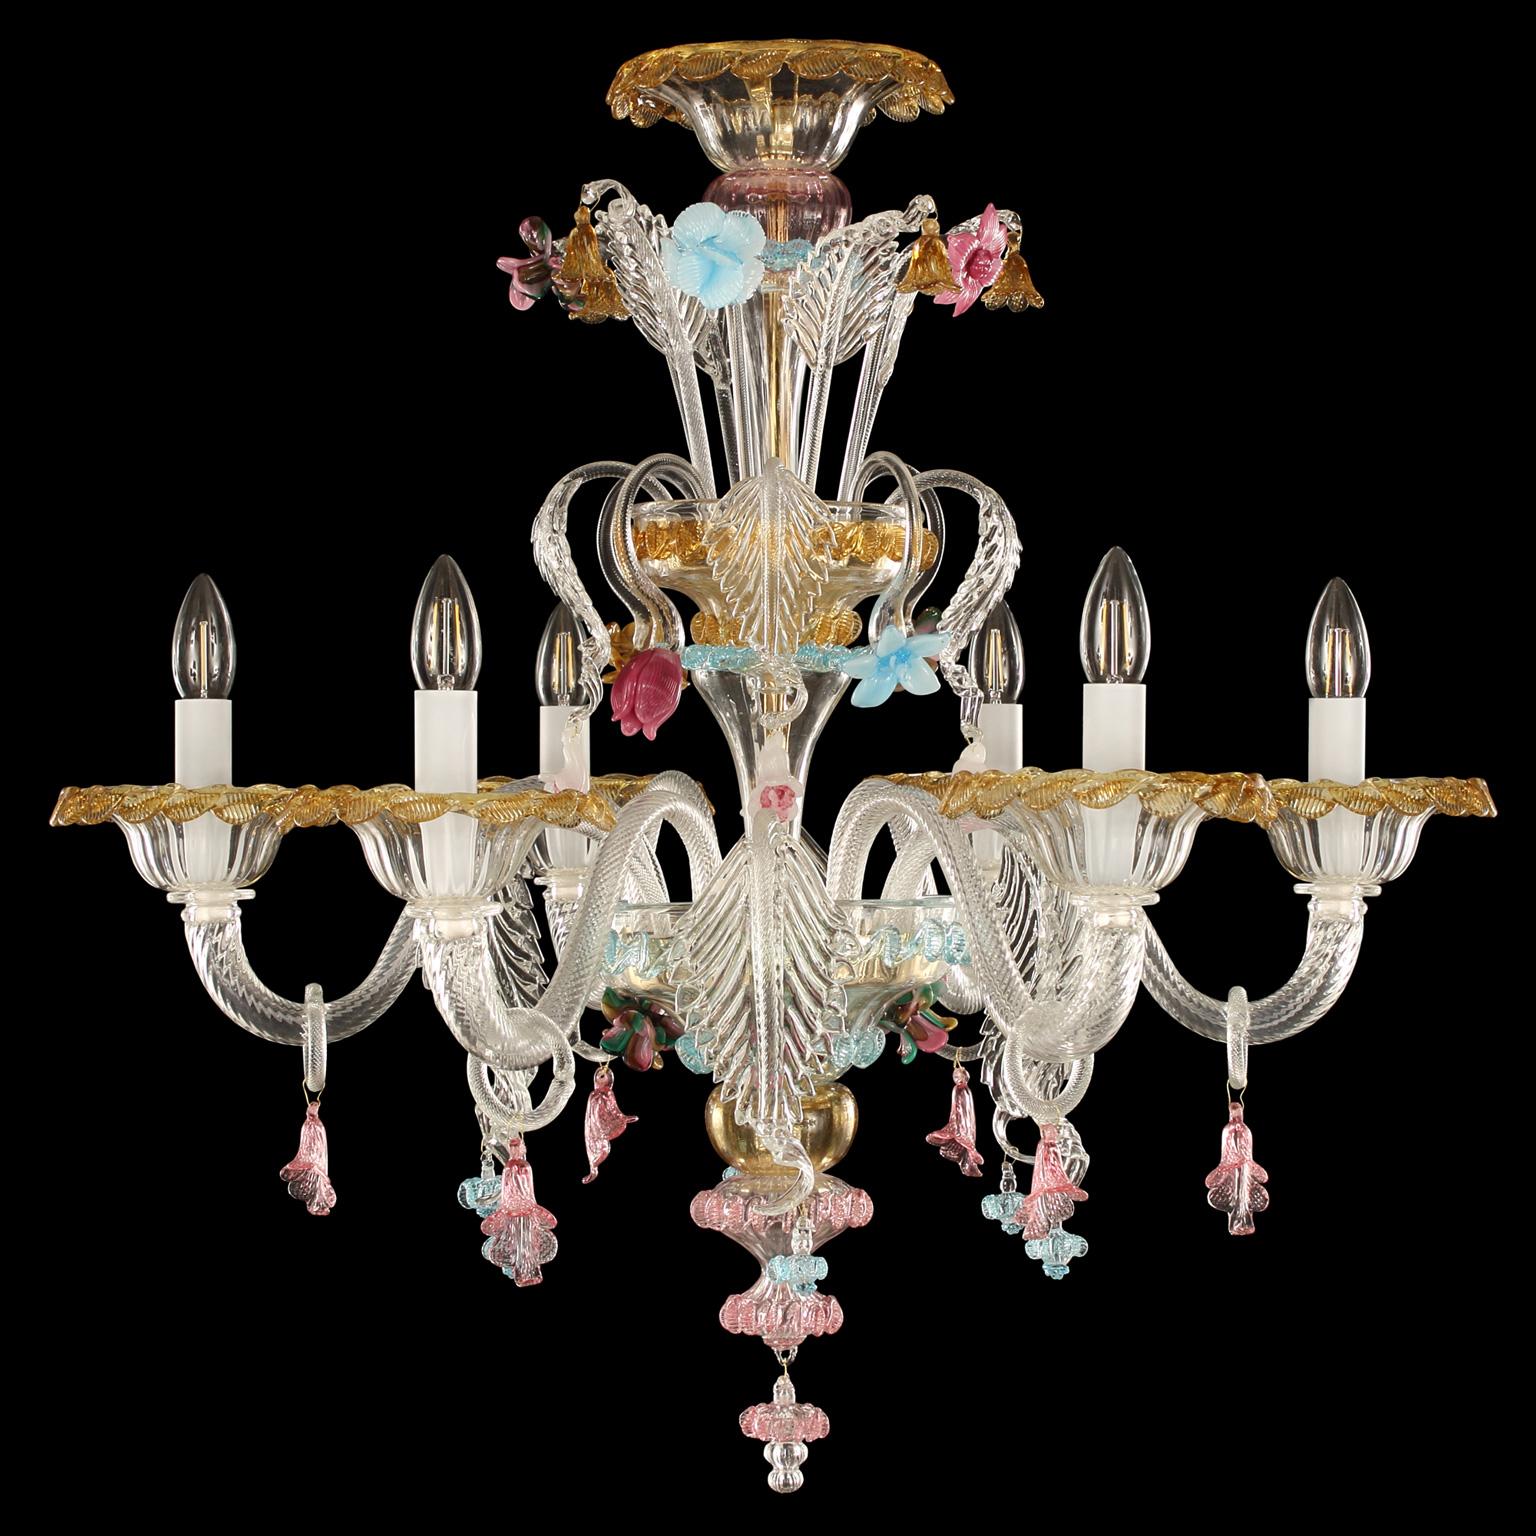 Toffee chandelier 6 arms, crystal Murano glass, multicolour details by Multiforme.
The artistic glass chandelier toffee is an elegant and delicate lighting work, colored with pastel tones. The structure is a combination of well proportioned volumes